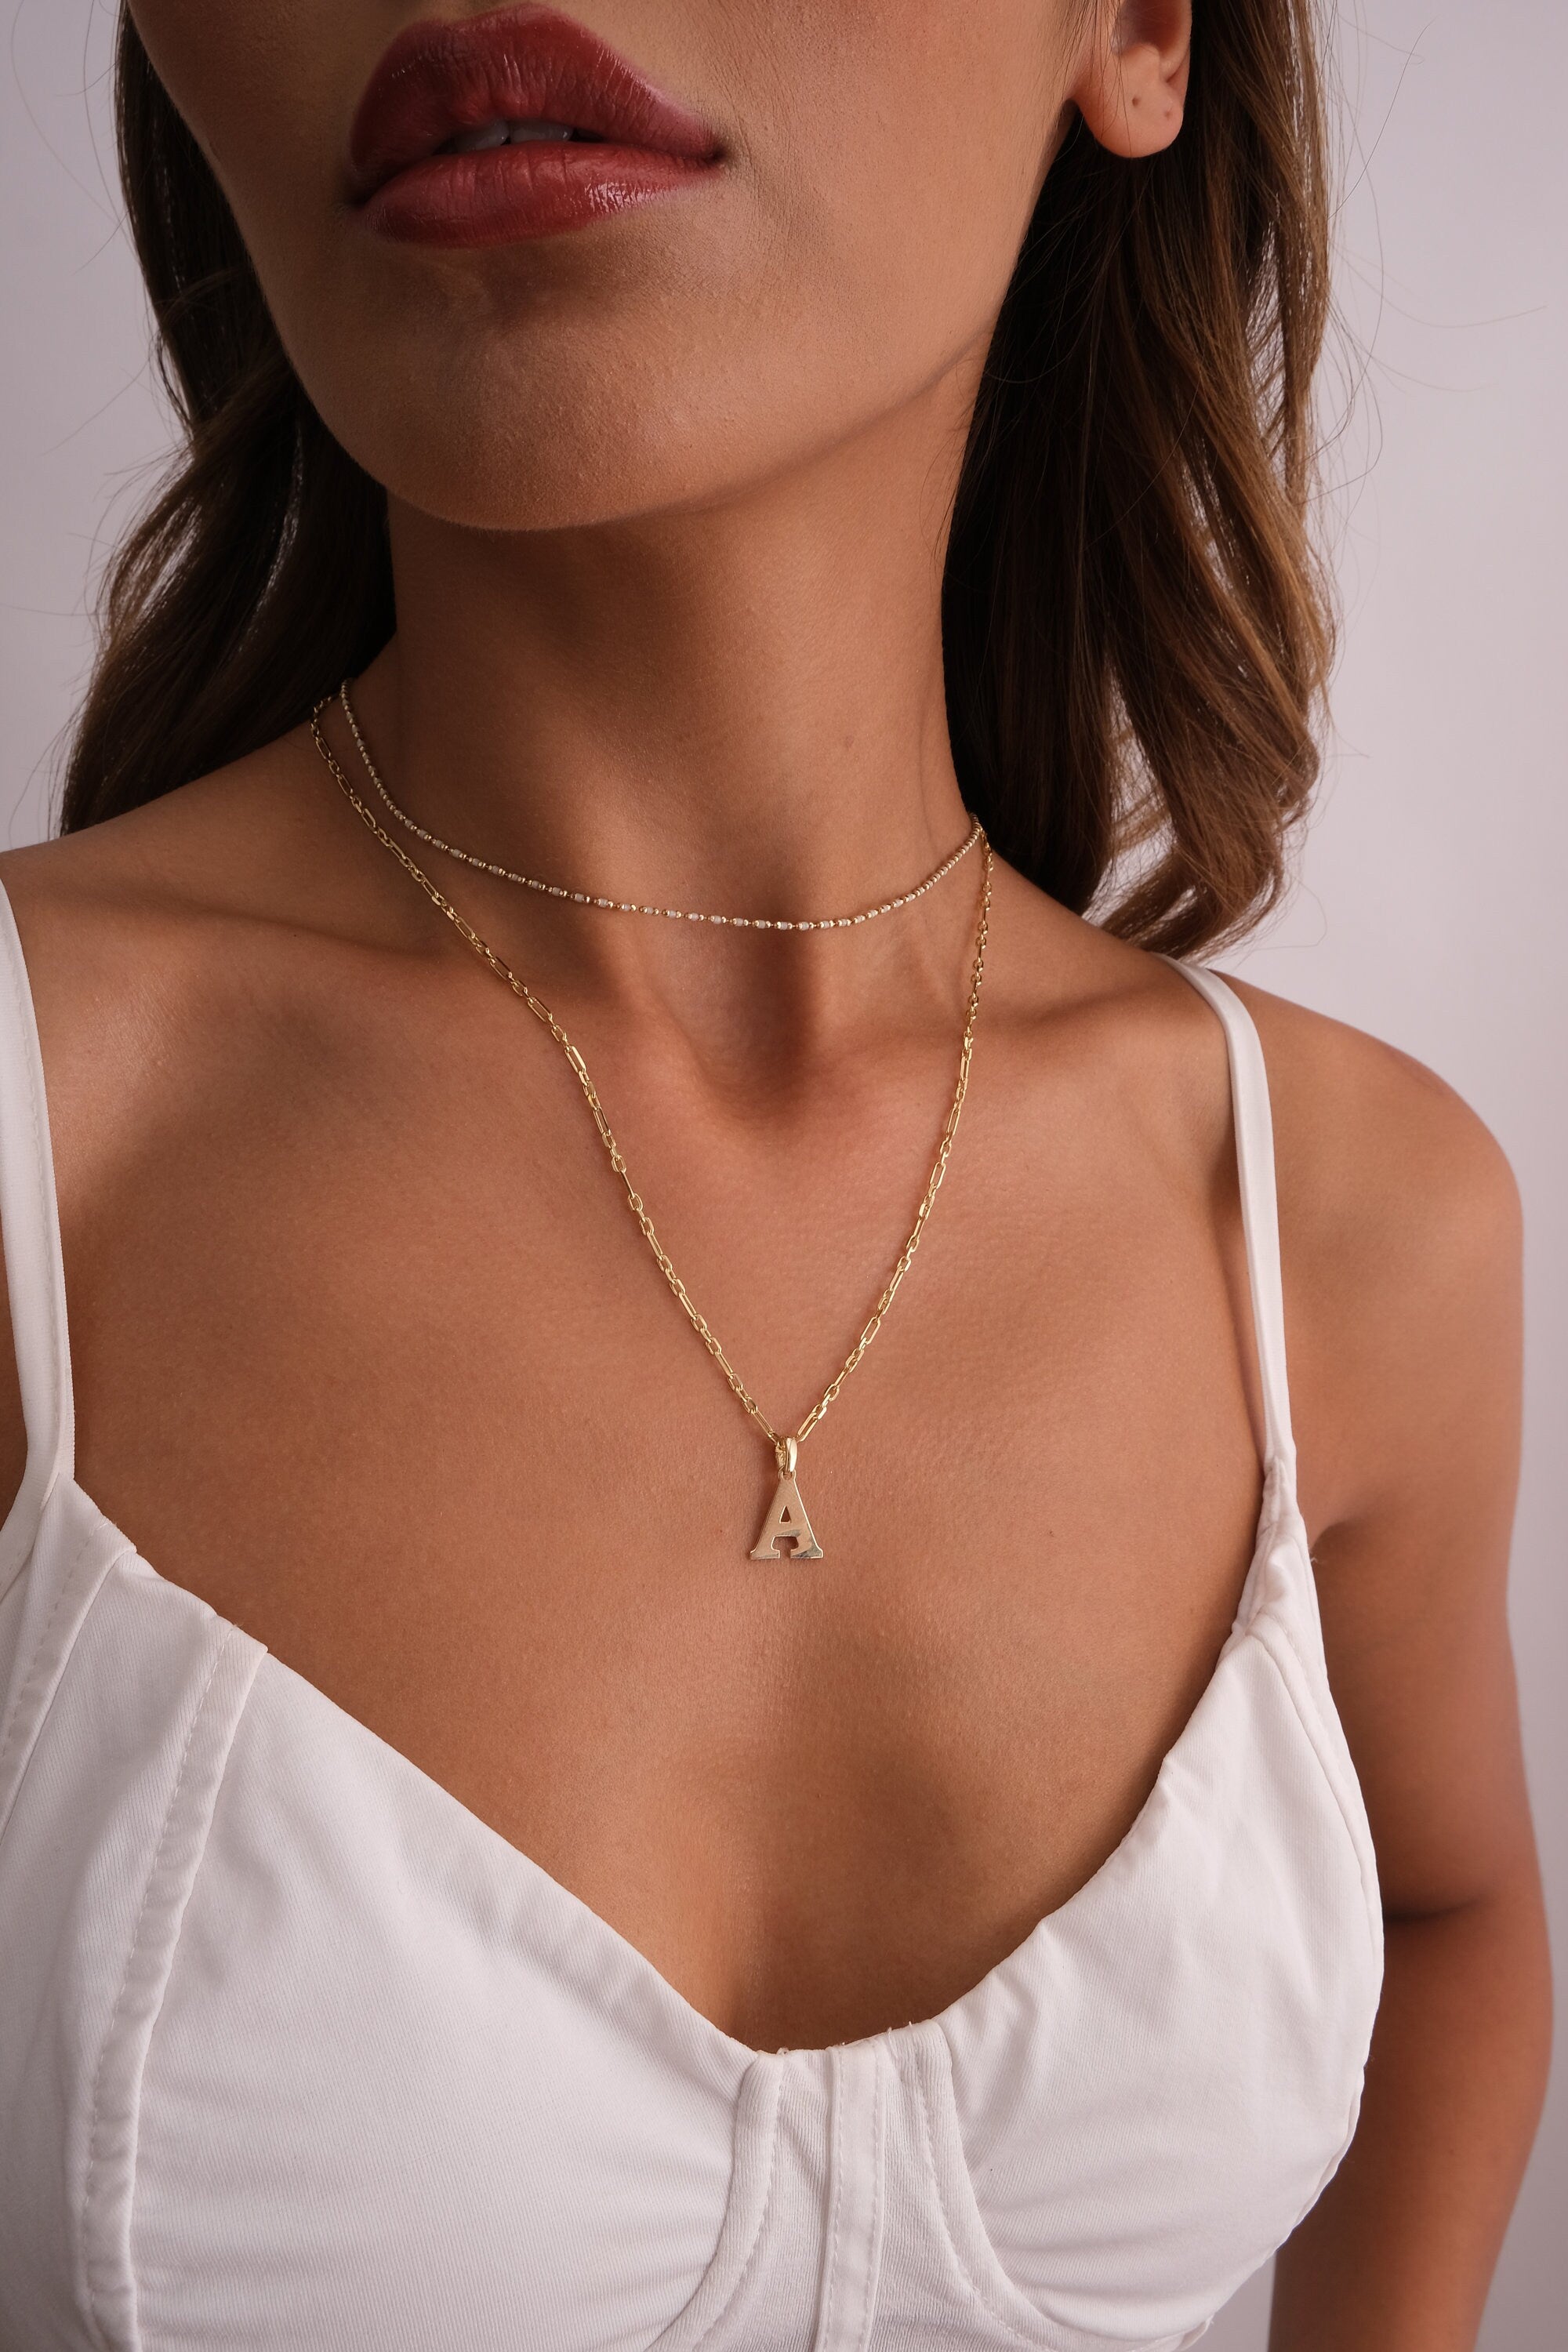 14K Gold Paperclip Chain Necklace, Personalized Initial Necklace, Rectangle Link Choker, Italian Paperclip Chain Necklace, Dainty Layering